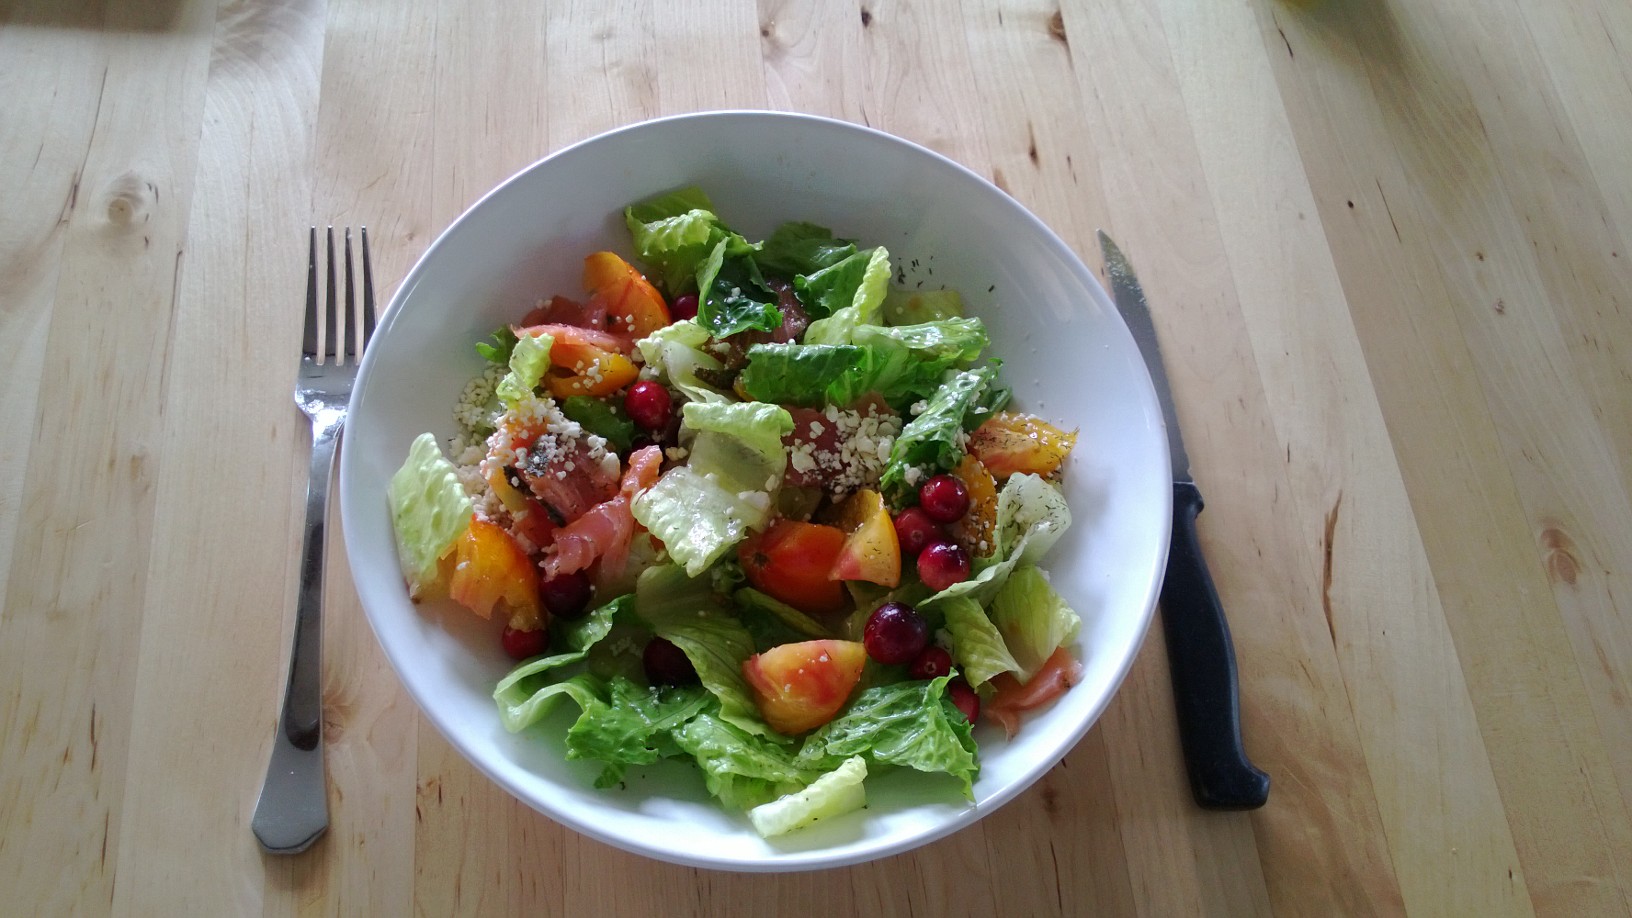 Welcoming Fall: cranberry and smoked salmon salad